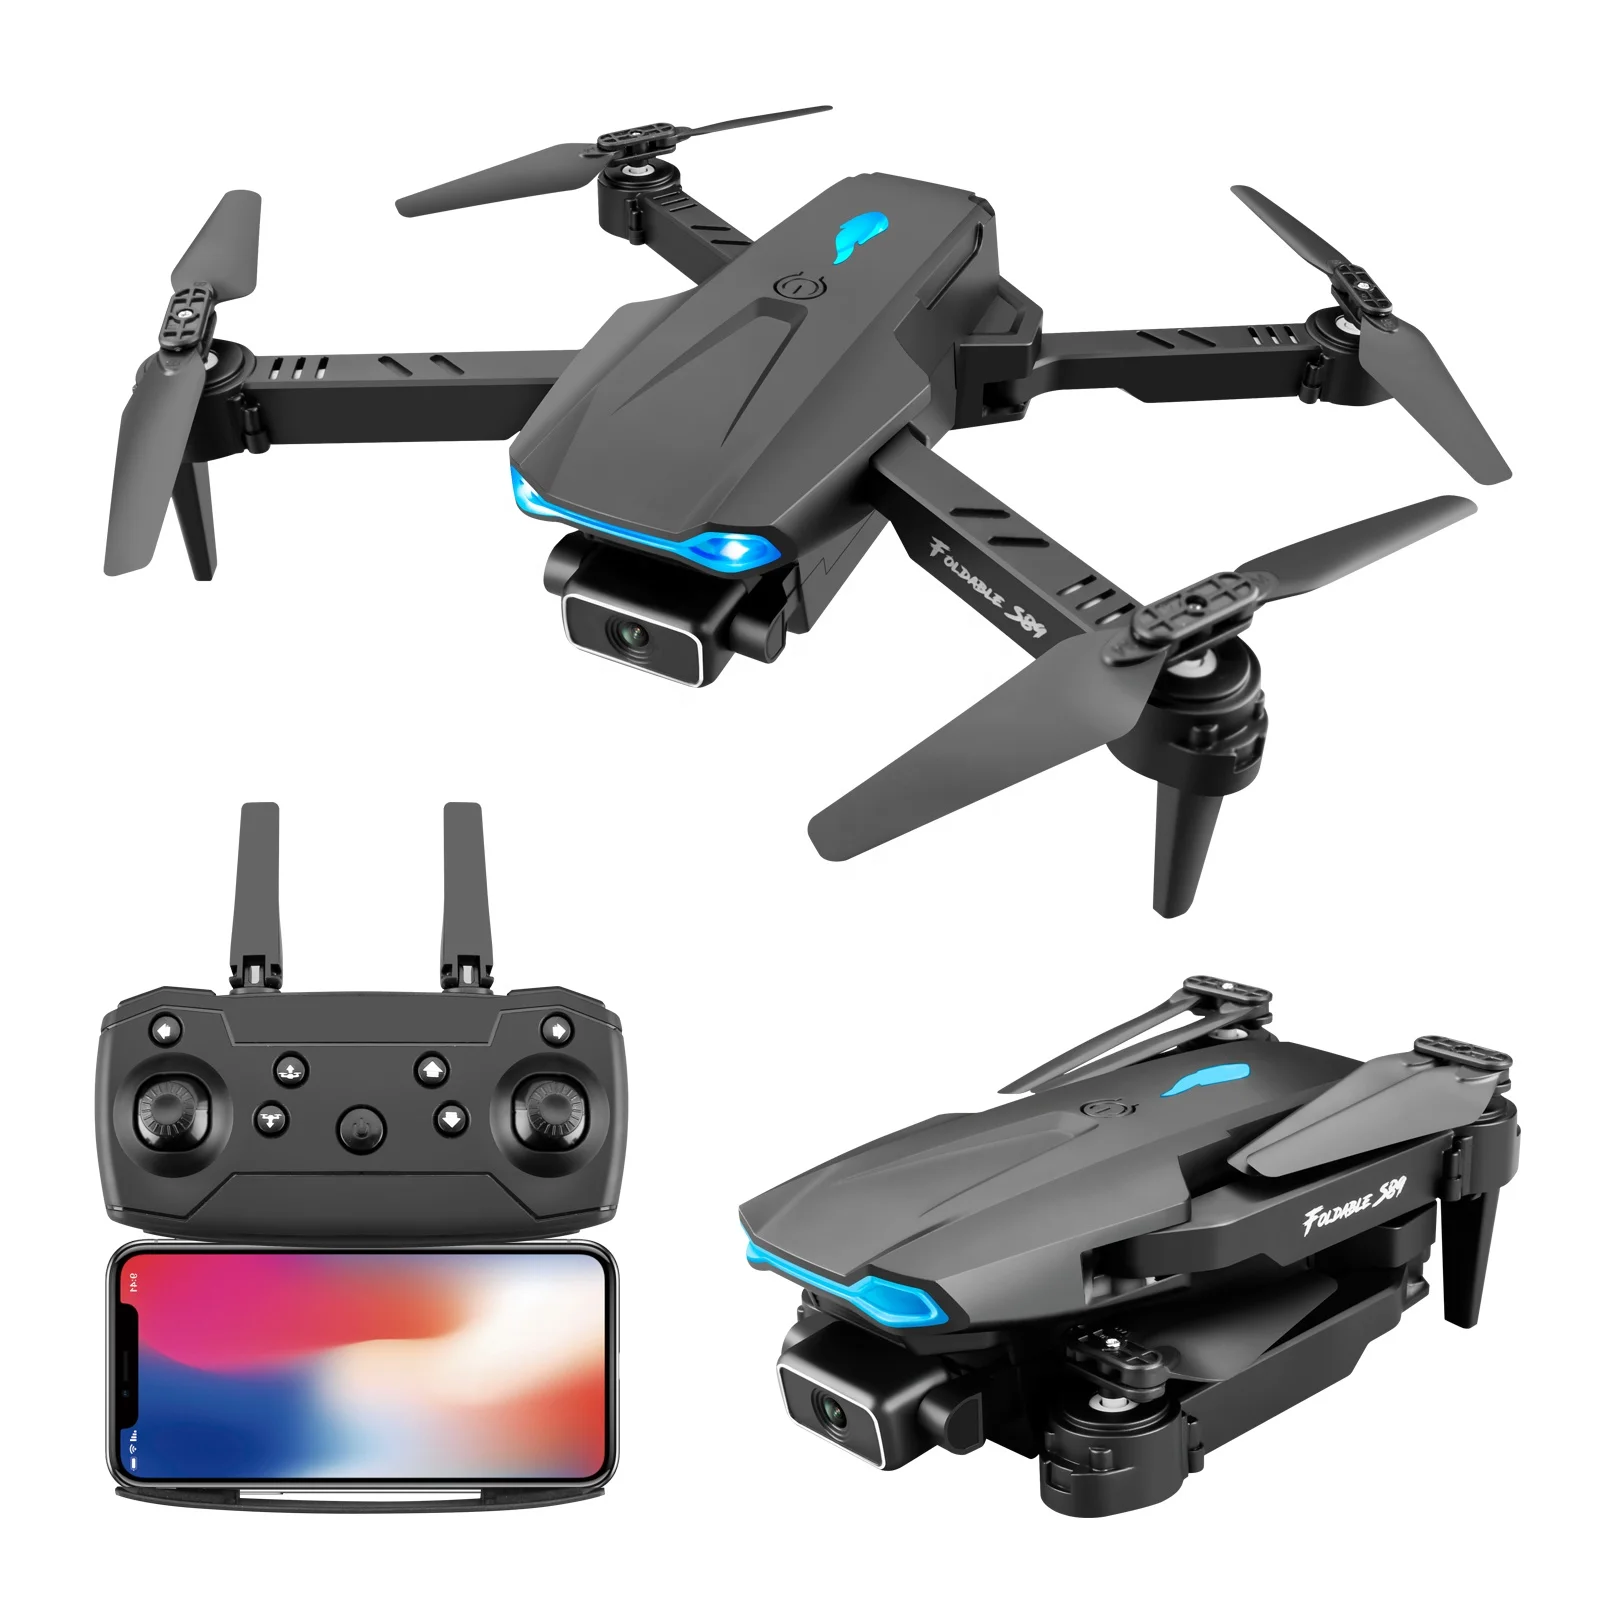 

Amiqi S89 Pro 4K Hd Dual Camera 1080P Wifi Fpv Visual Positioning Dron Height Preservation Rc Quadcopter Dropshipping Drone